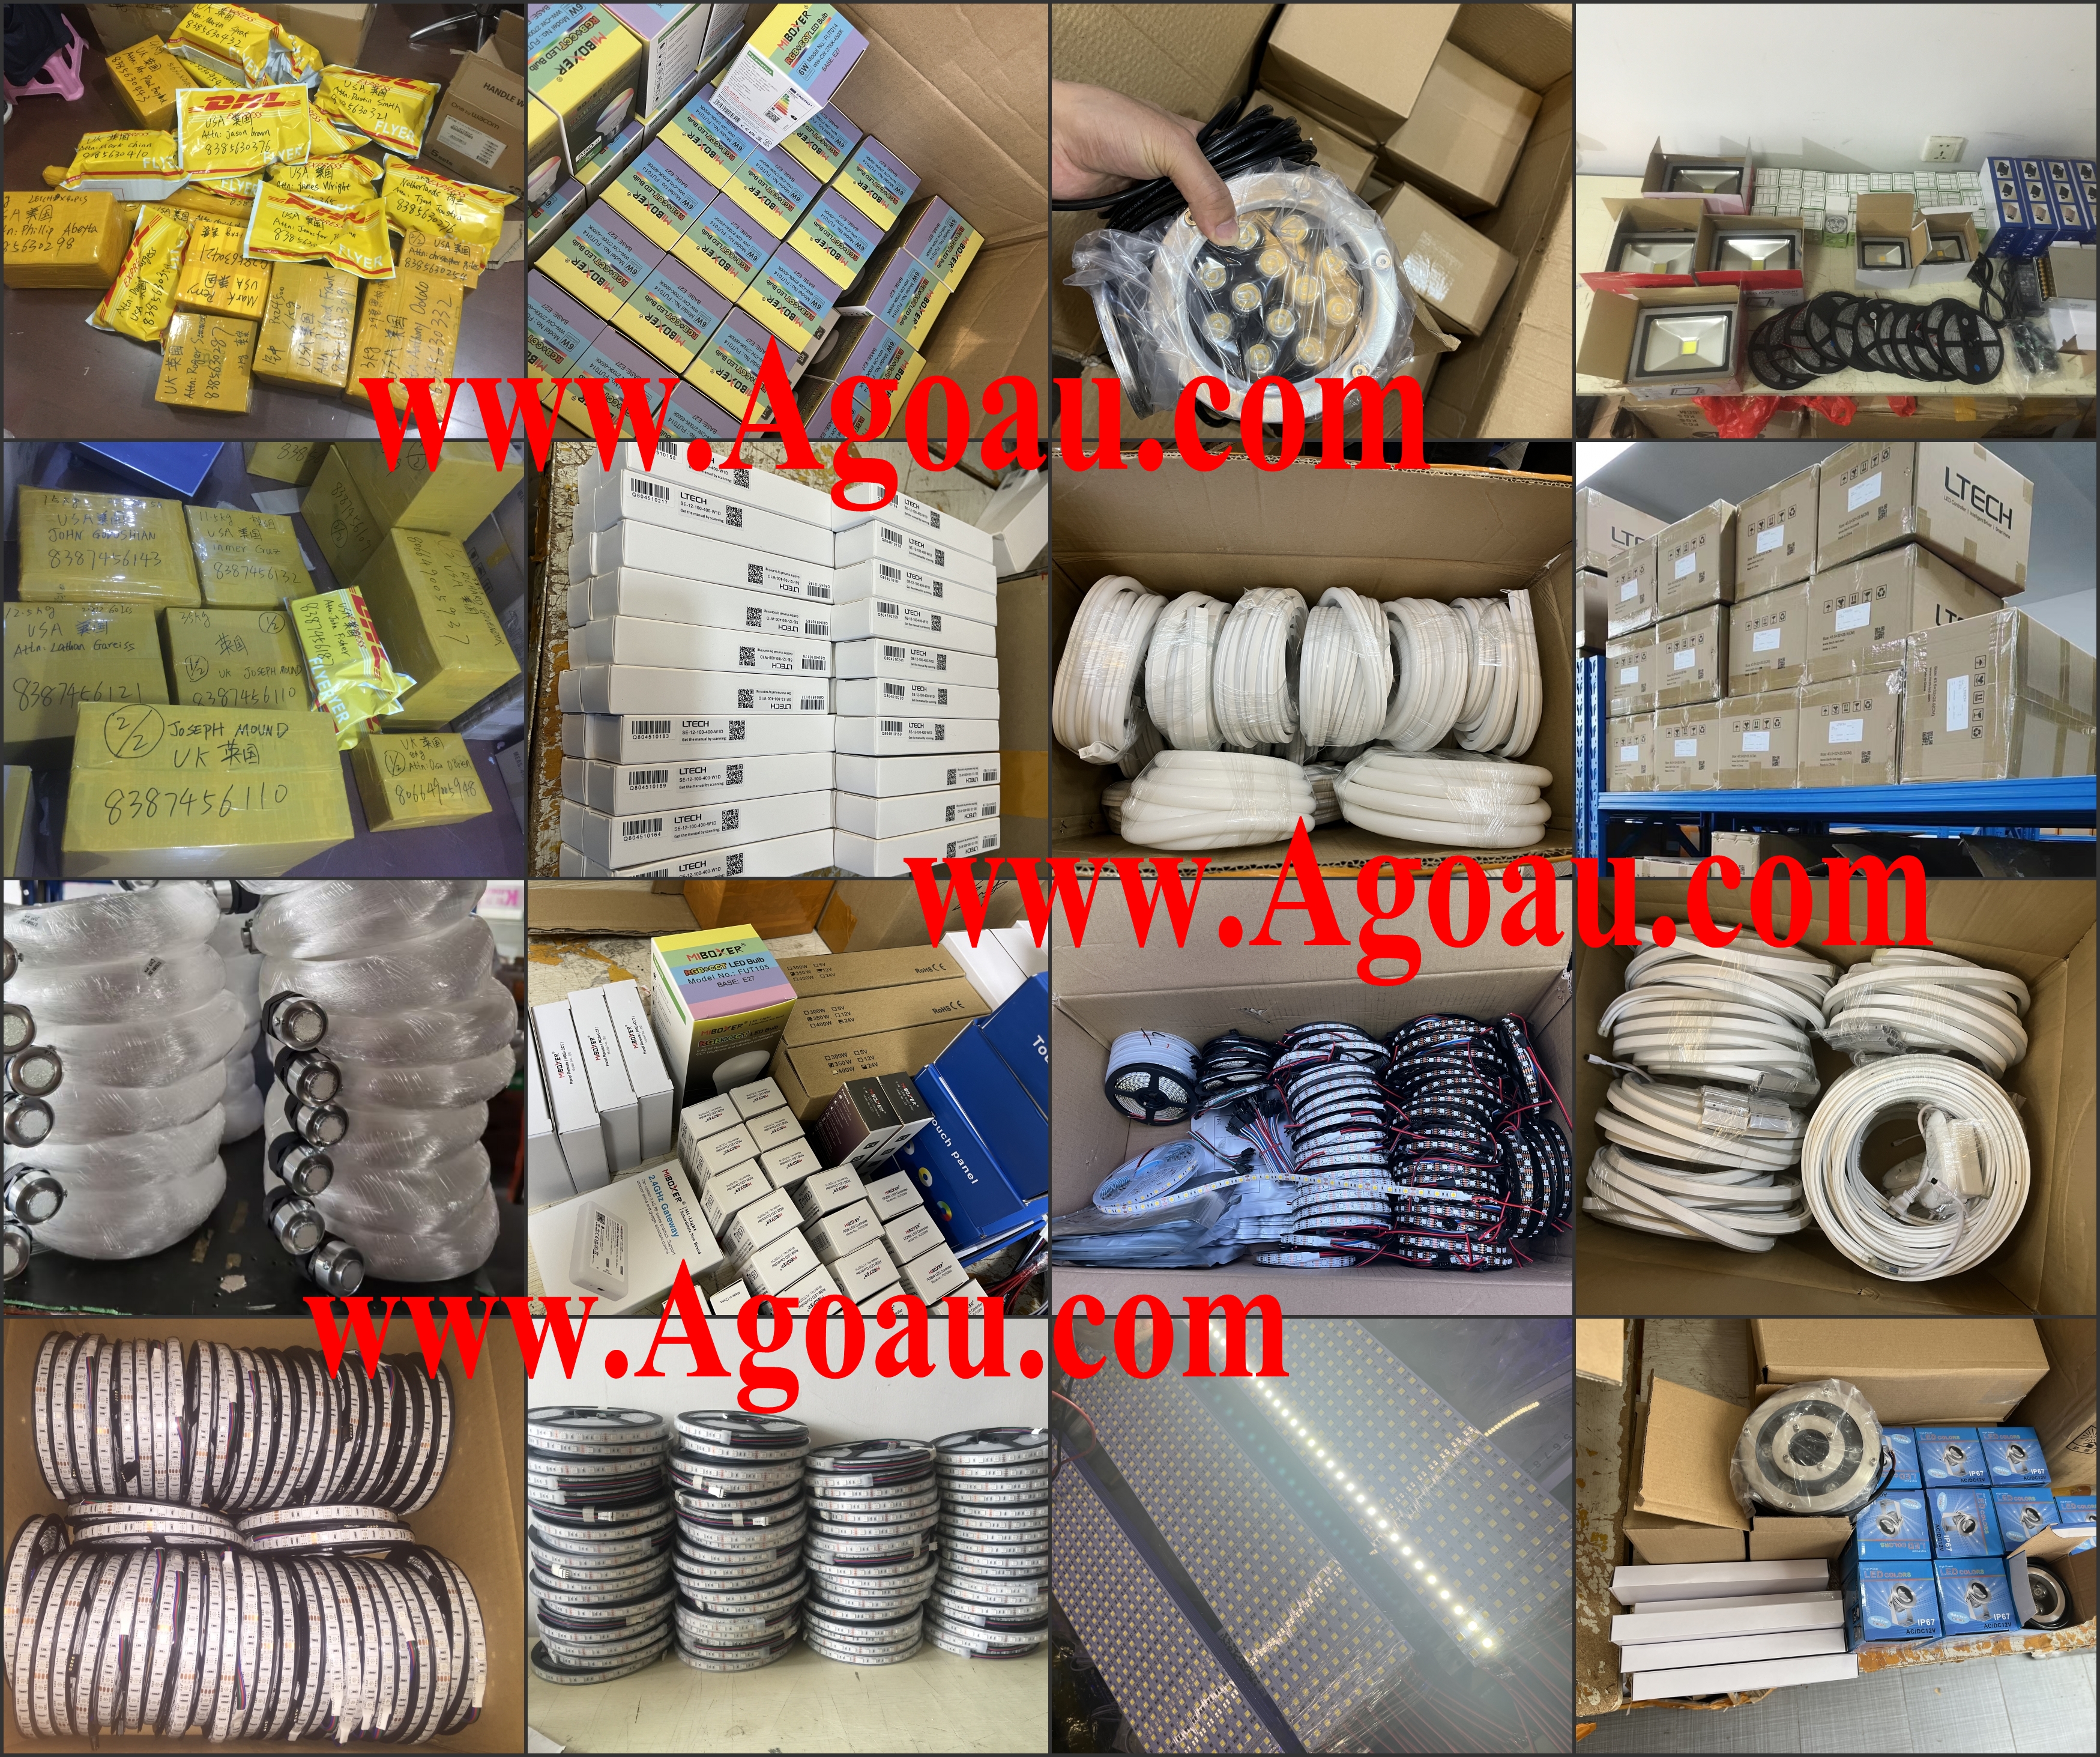 Parcels_shipping_from_agoau_to_UK_USA_1